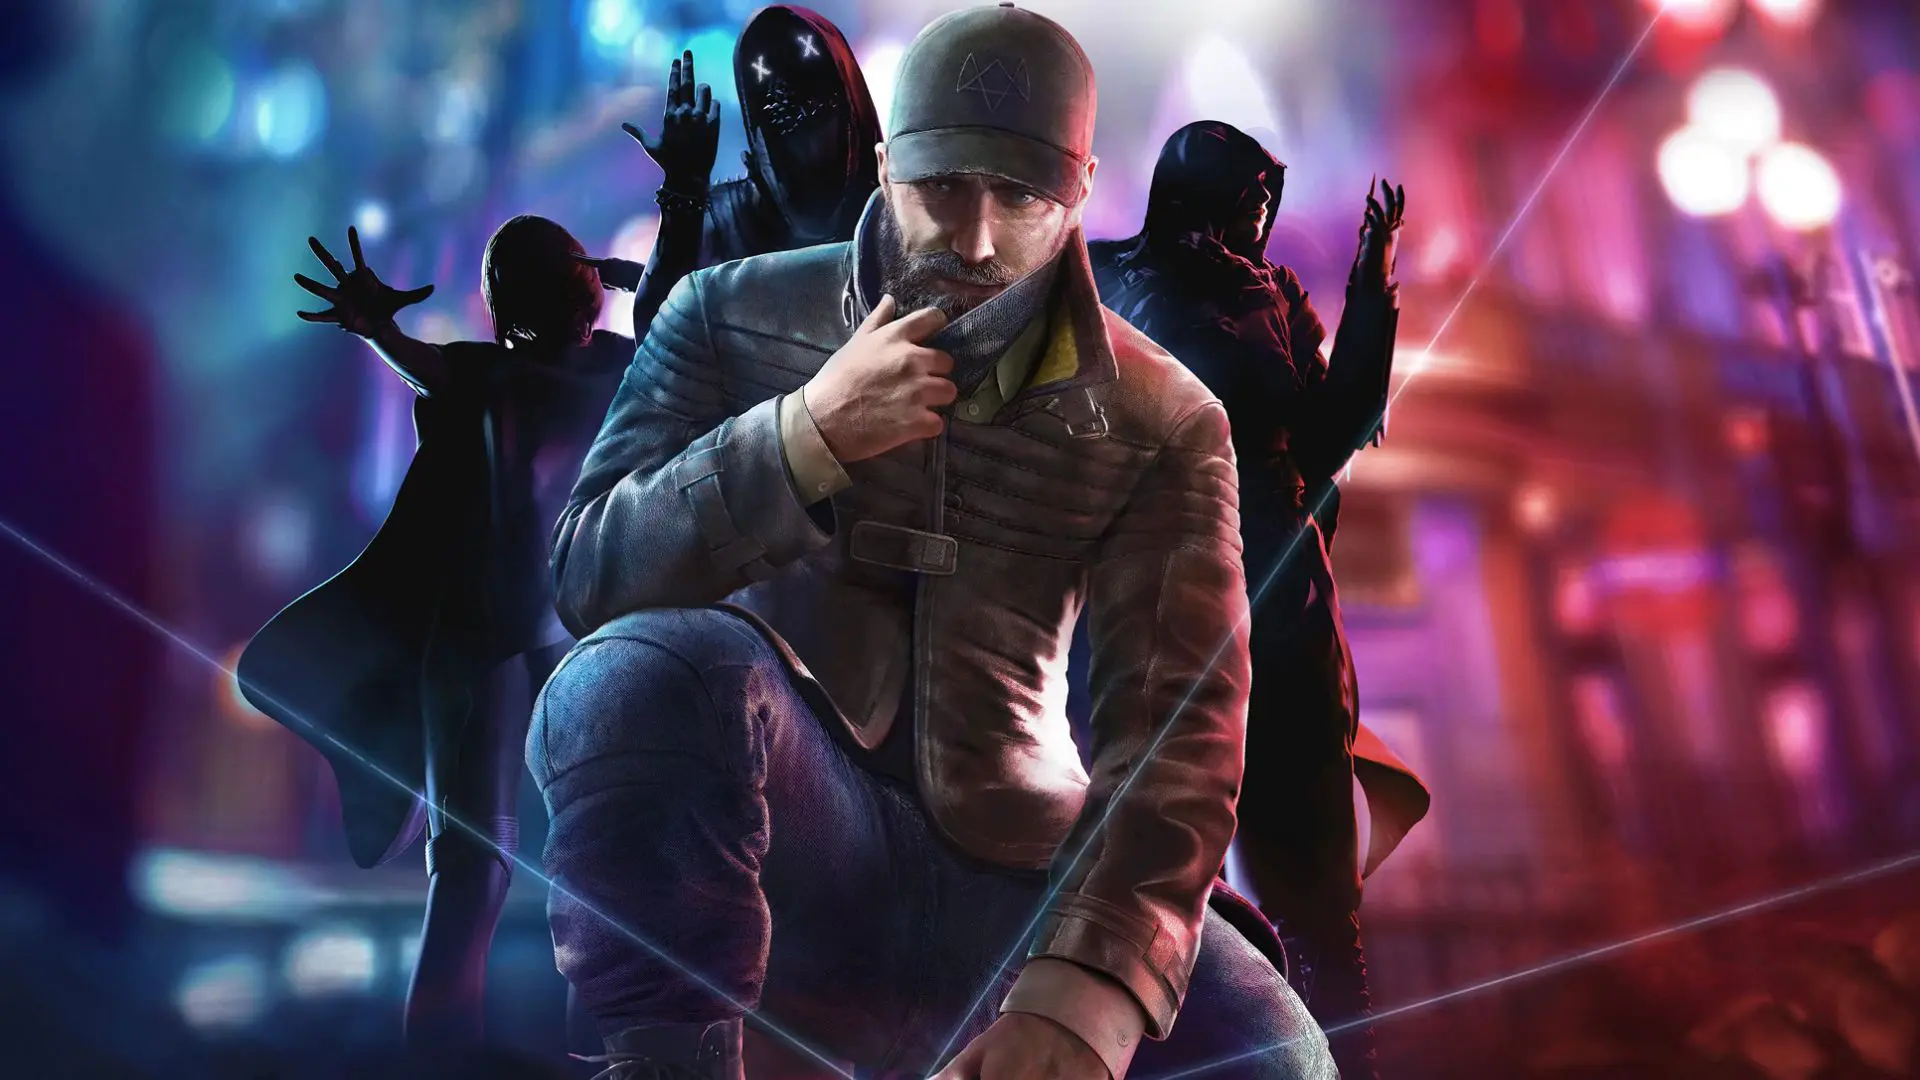 Watch Dogs Legion Update 1.20 Patch Notes Watch Dogs Legion Update 1.150 Patch Notes